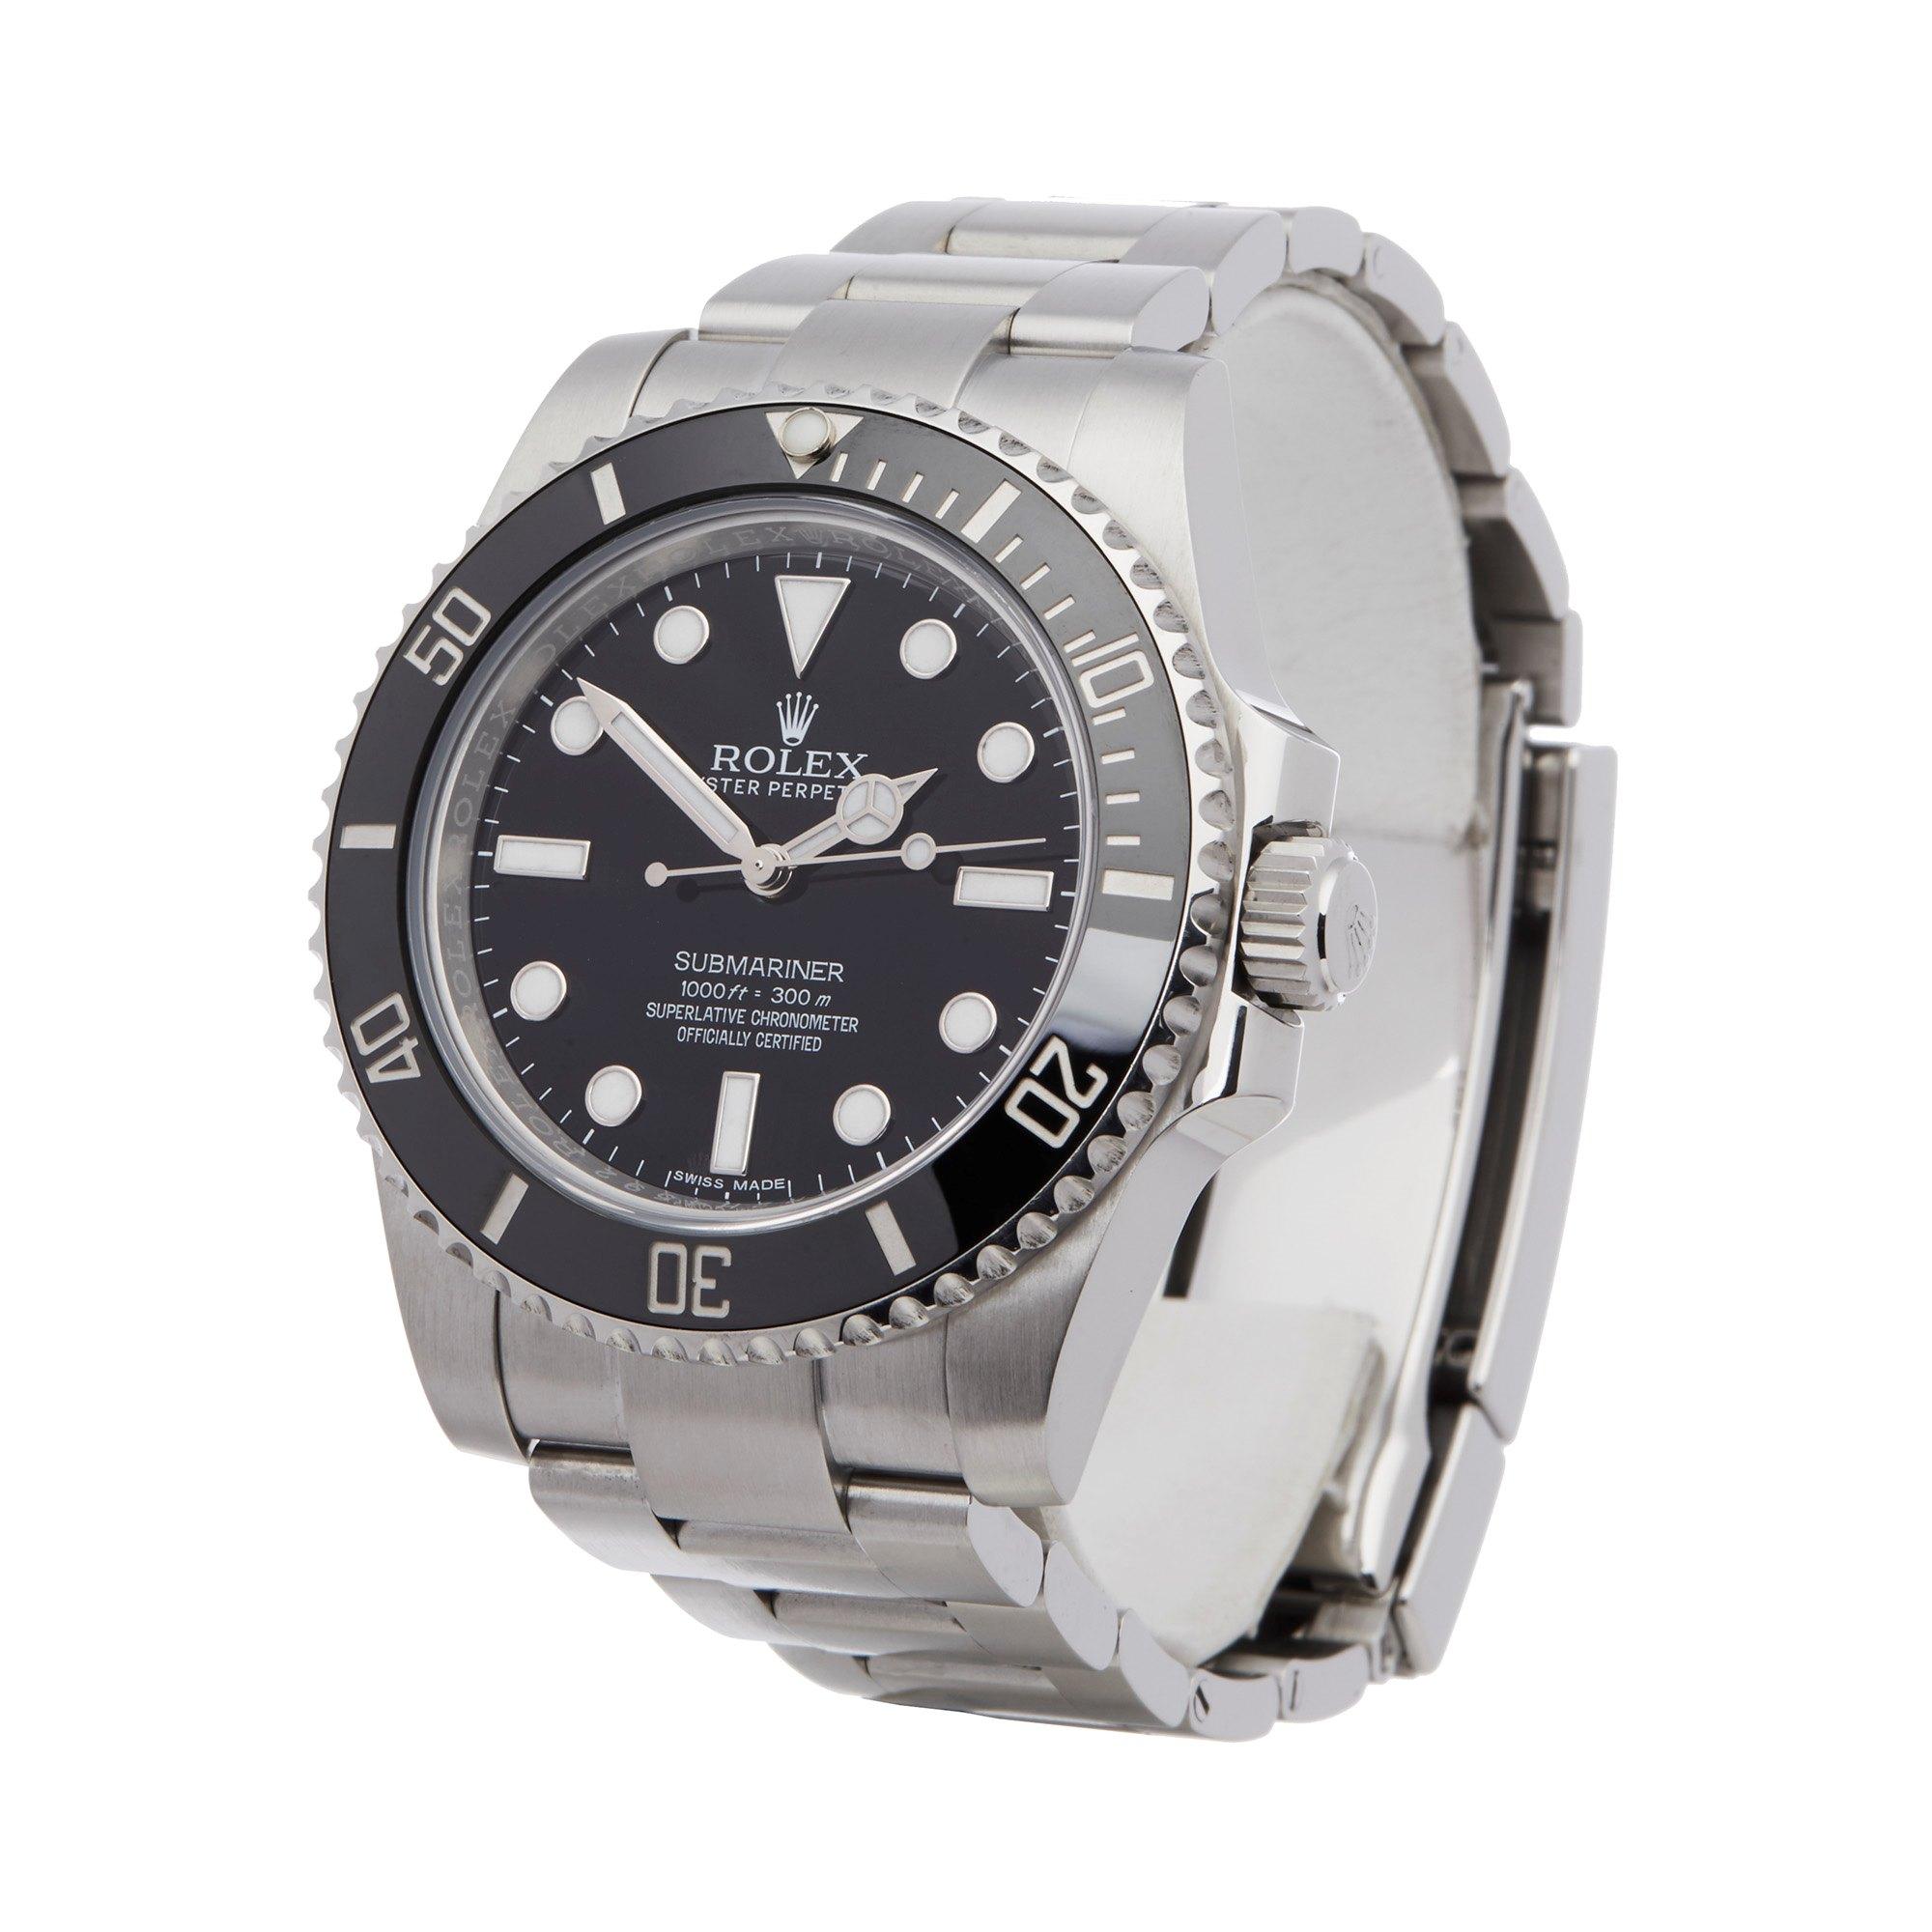 Xupes Reference: W007742
Manufacturer: Rolex
Model: Submariner
Model Variant: No Date
Model Number: 114060
Age: 16-07-2016
Gender: Men
Complete With: Rolex Box, Manual, Booklet, Swing Tags, Bezel Guard & Guarantee
Dial: Black Other
Glass: Sapphire